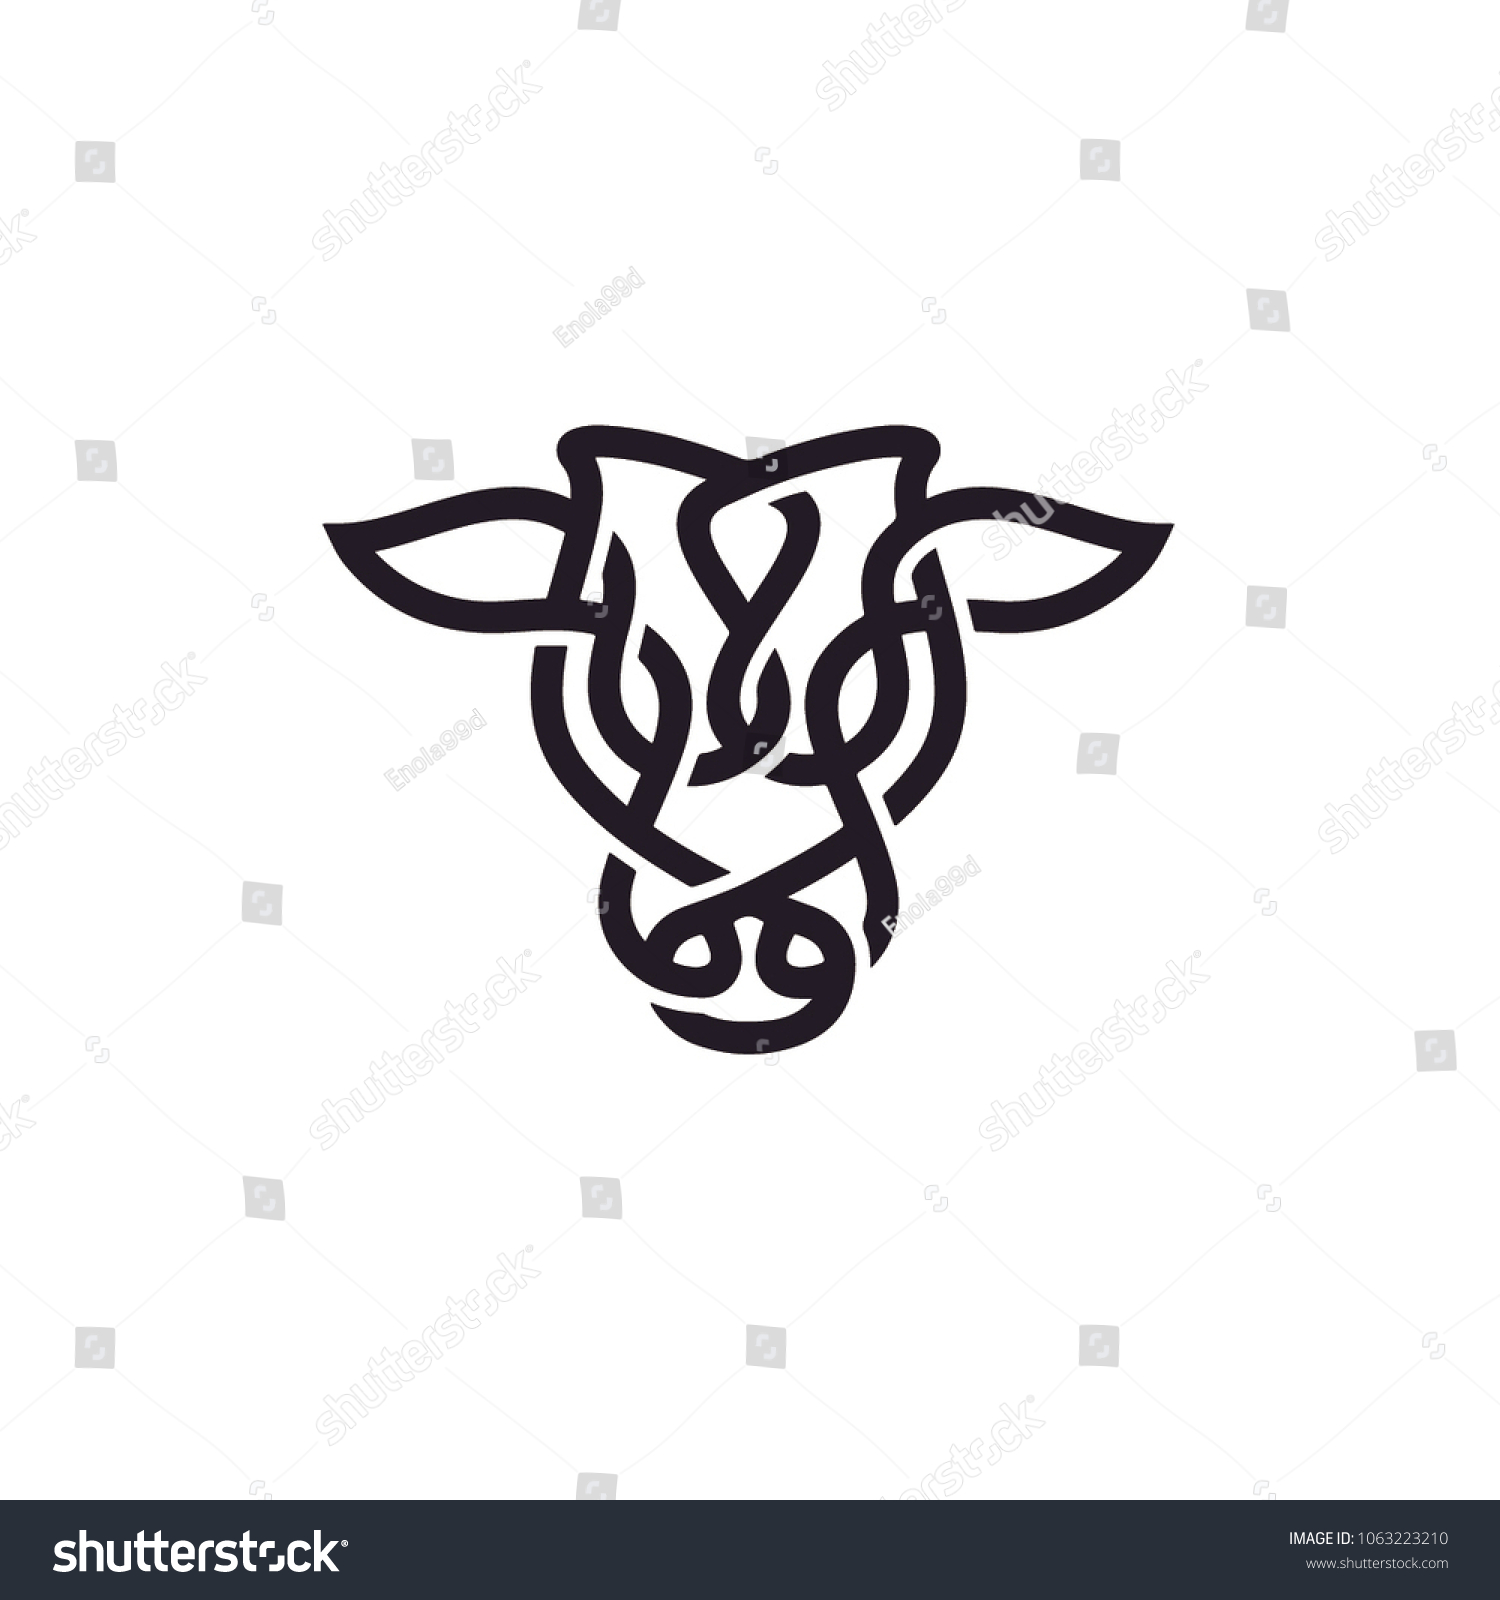 SVG of Bull Cow Angus Buffalo Longhorn Cattle Head with Celtic Knot Line Style Logo design inspiration	
 svg